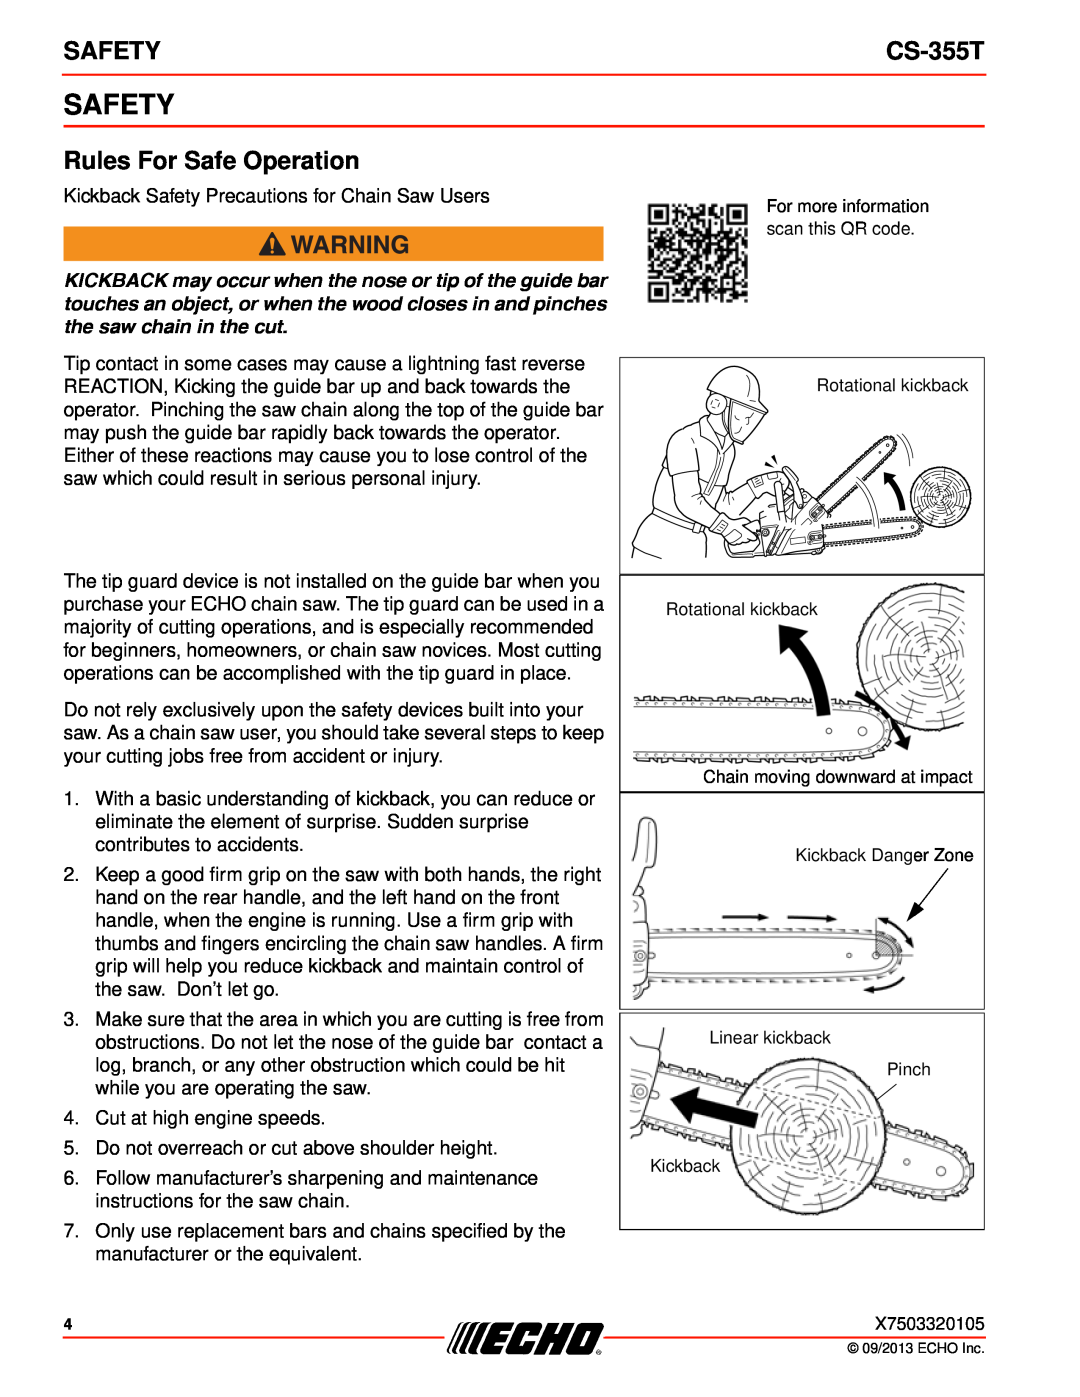 Echo CS-355T instruction manual Safety, Rules For Safe Operation 